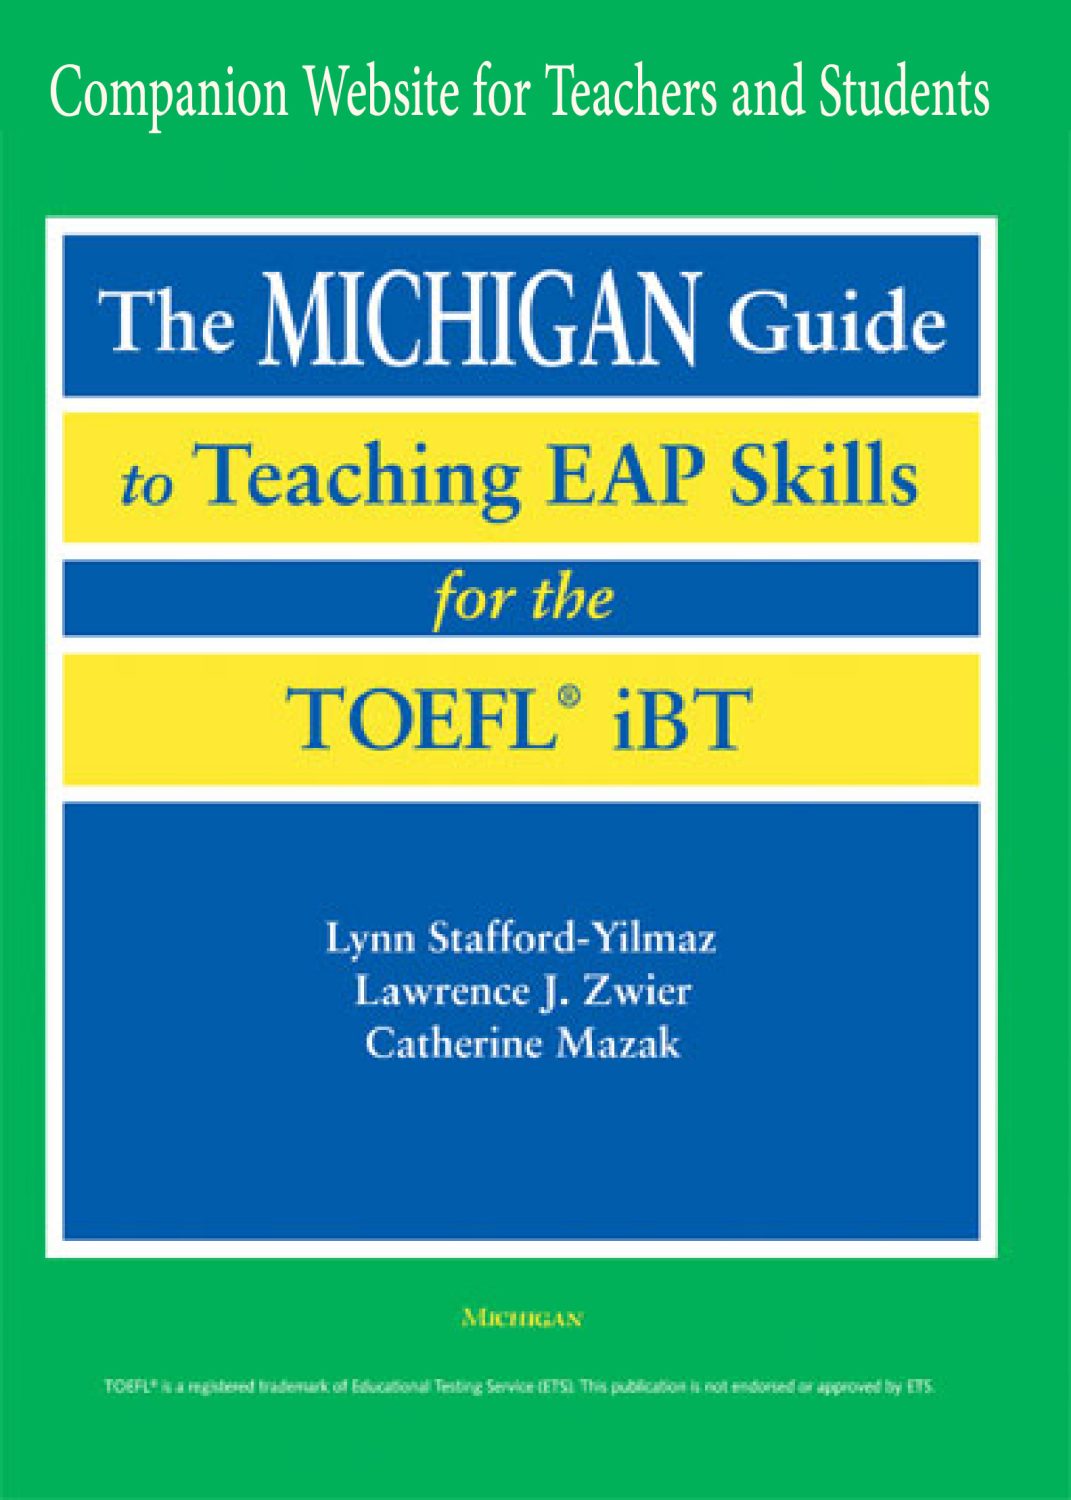 Cover image for Michigan Guide to Teaching EAP Skills for the TOEFL iBT